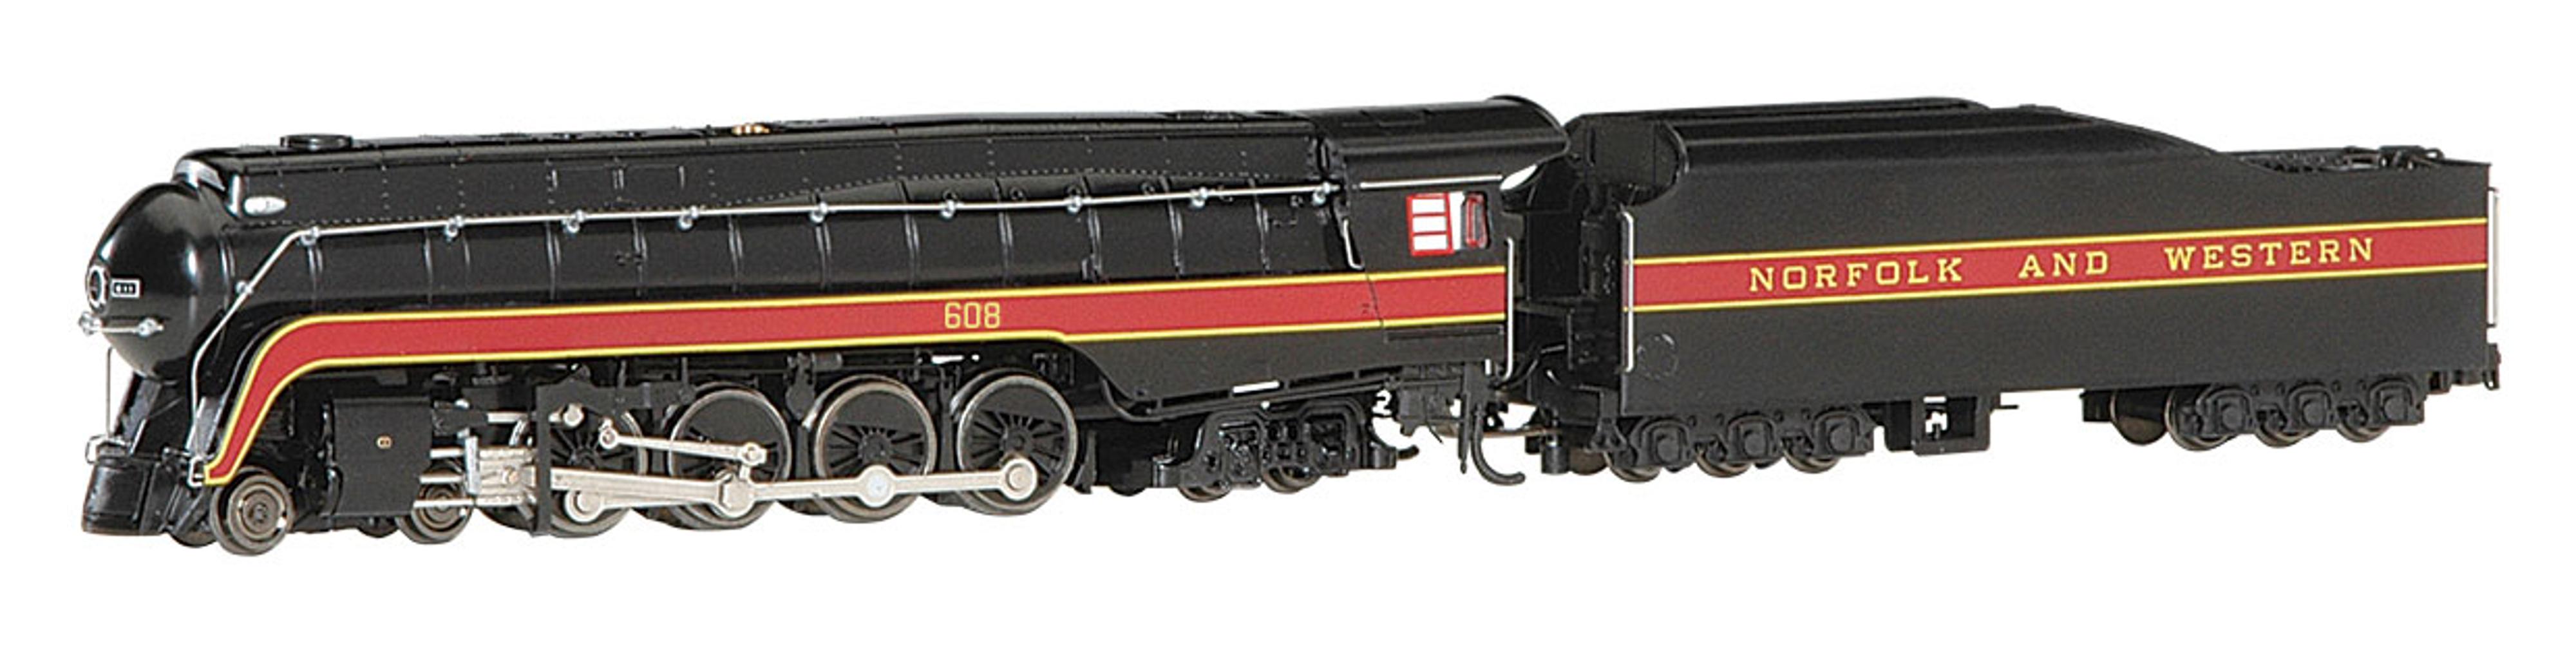 Bachmann N-Scale N and W #608 Class J 4-8-4 DCC Sound Value Train